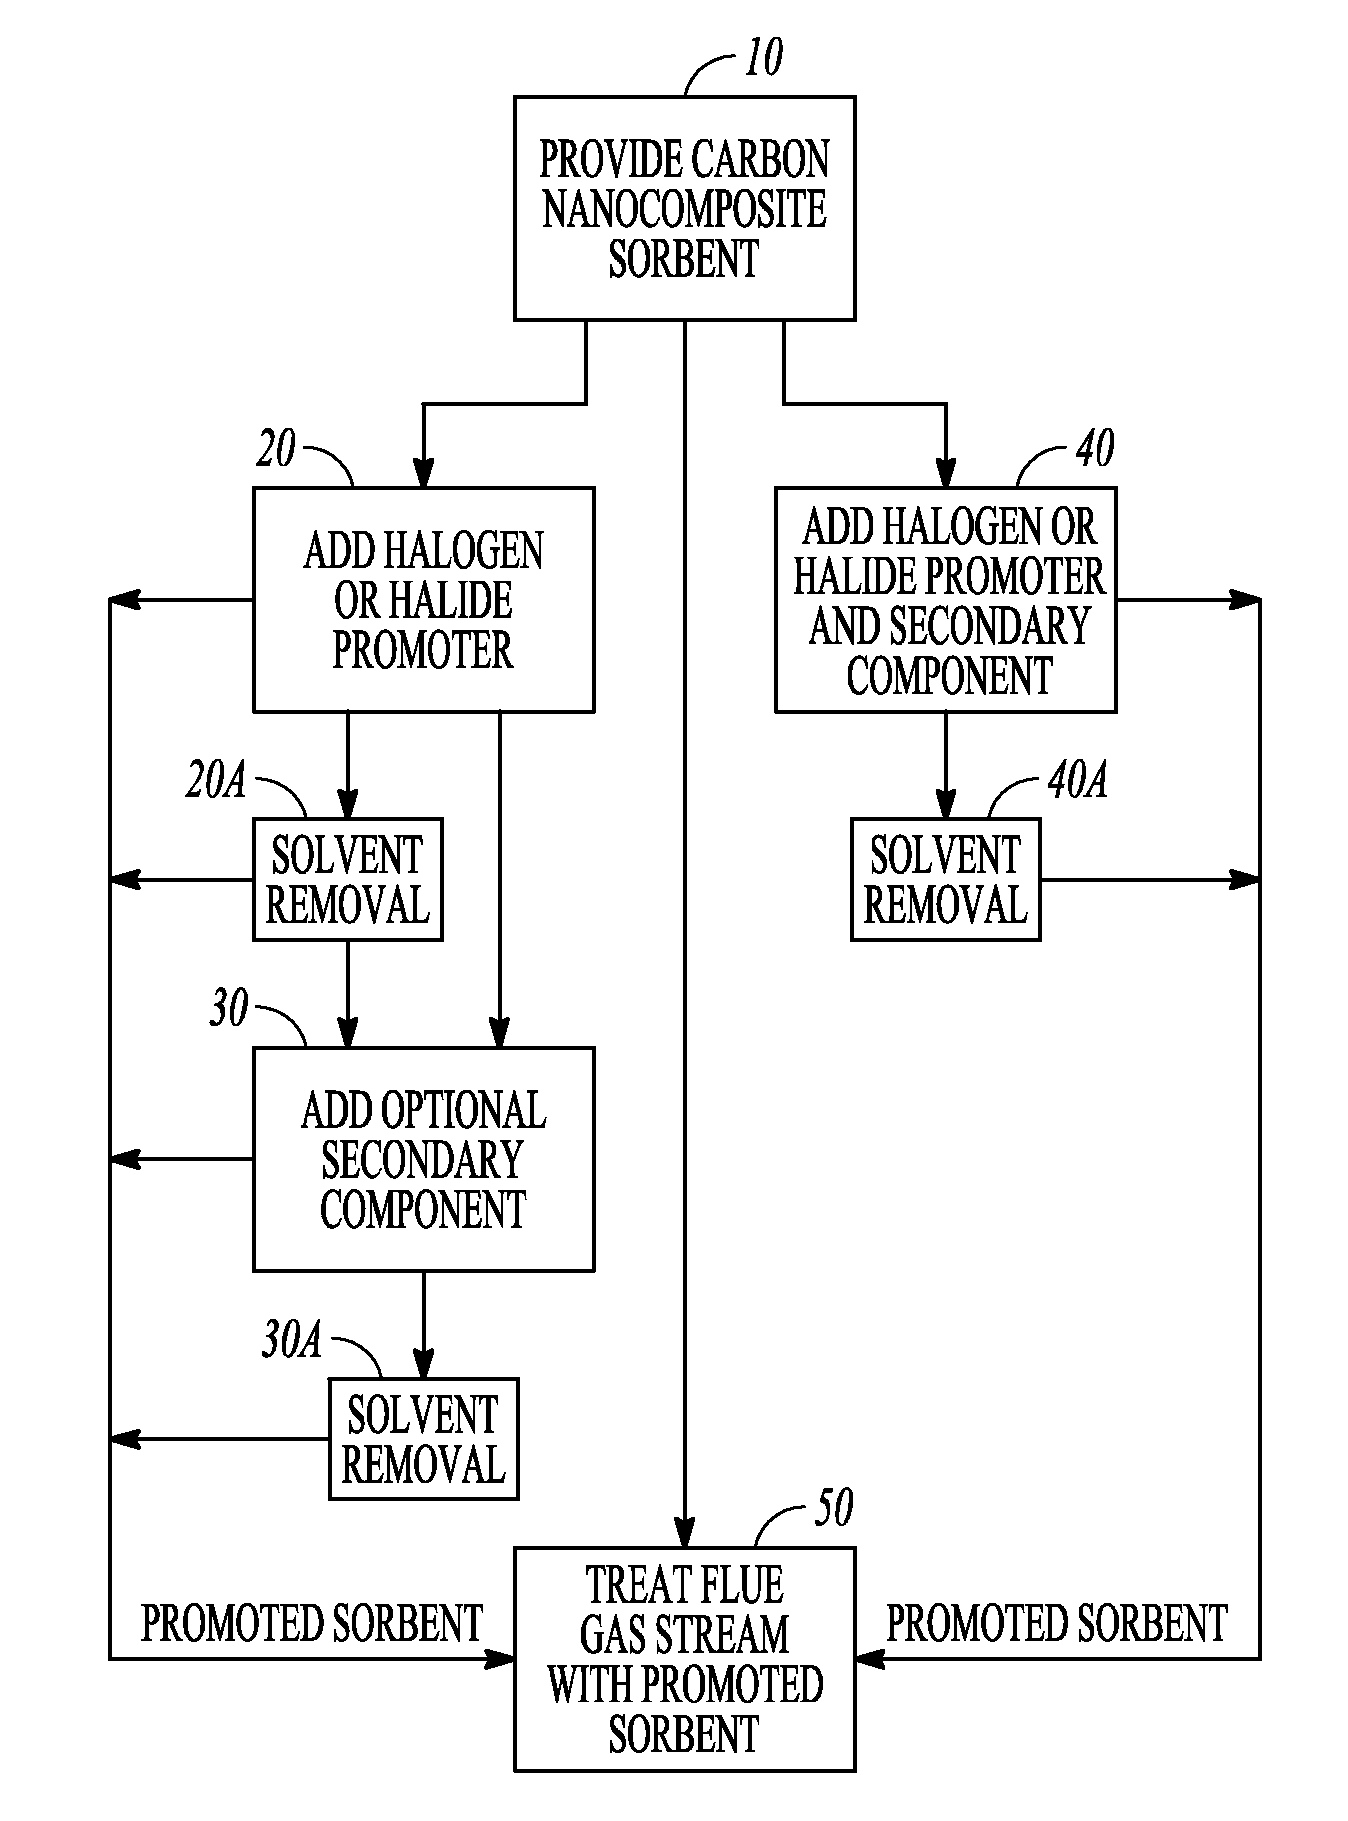 Carbon nanocomposite sorbent and methods of using the same for separation of one or more materials from a gas stream